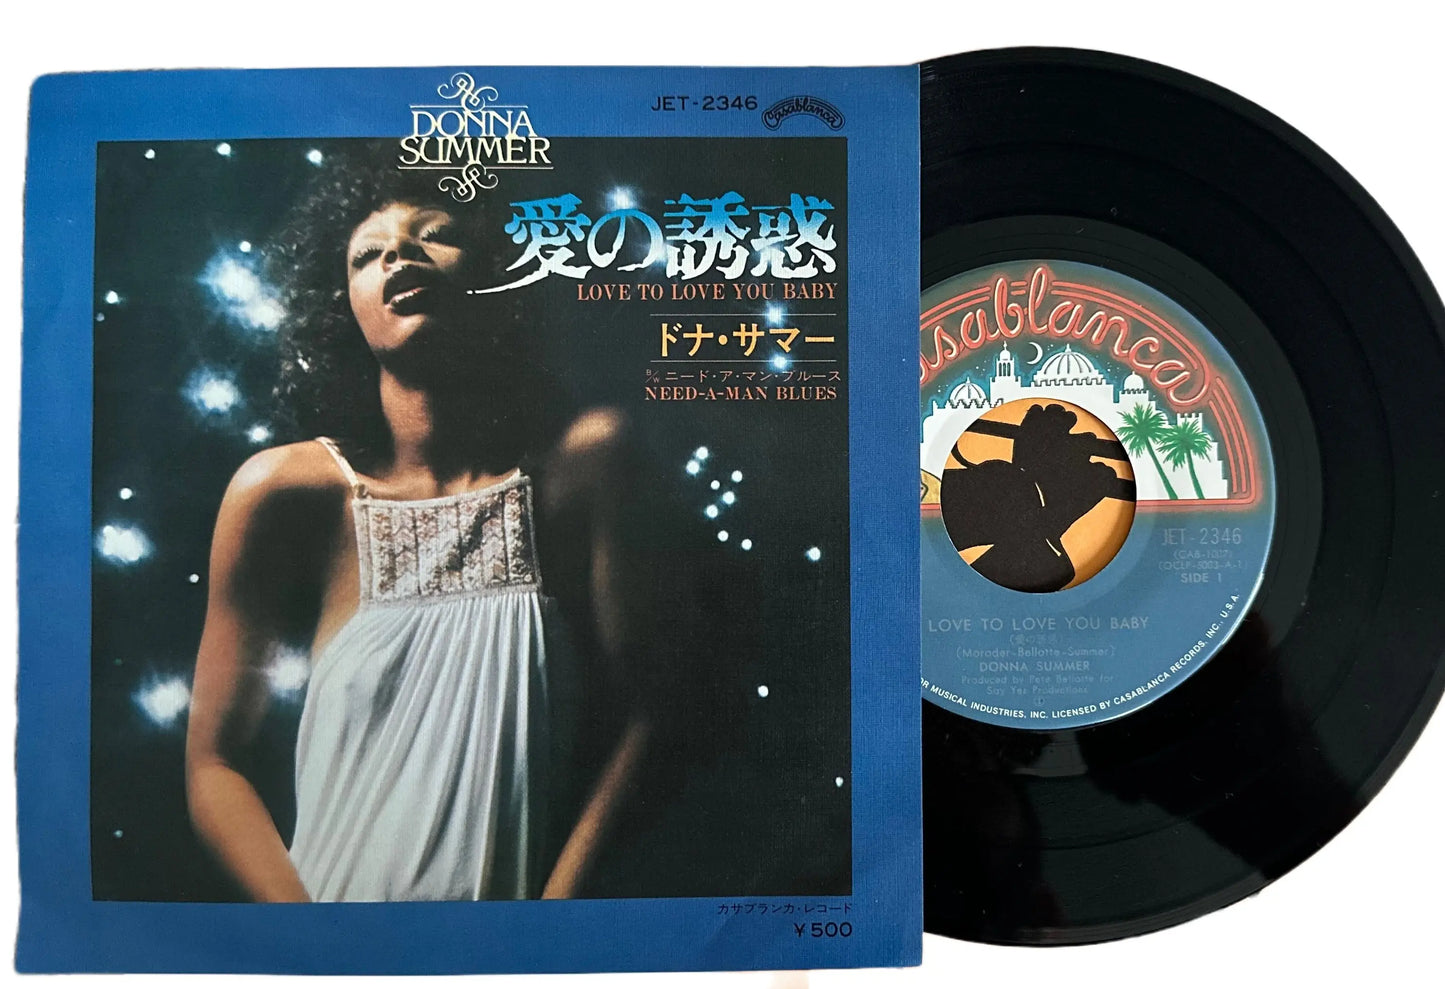 Donna Summer - Love To Love You Baby [Japanese 45 7" Vinyl Single]